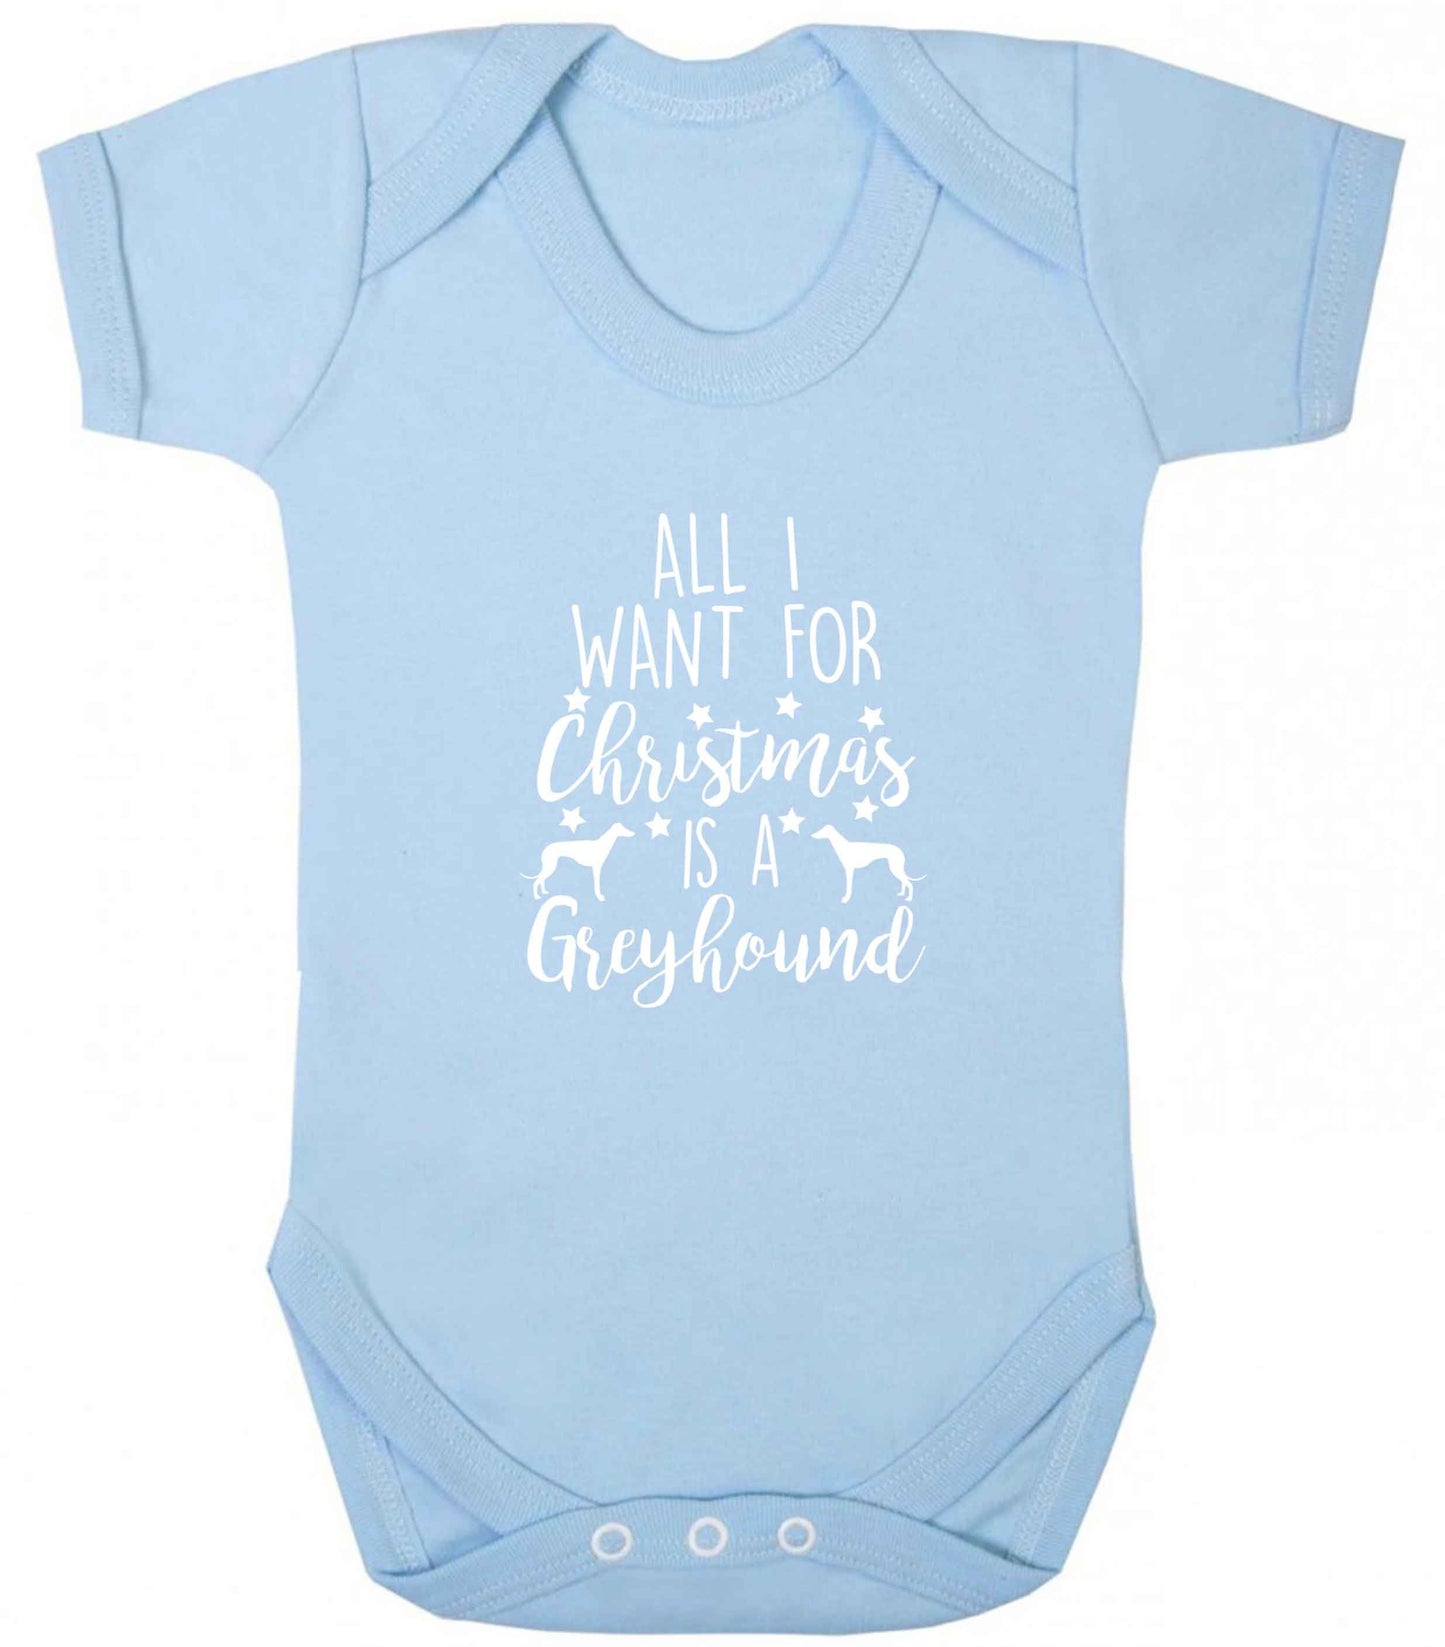 All I want for Christmas is a greyhound baby vest pale blue 18-24 months